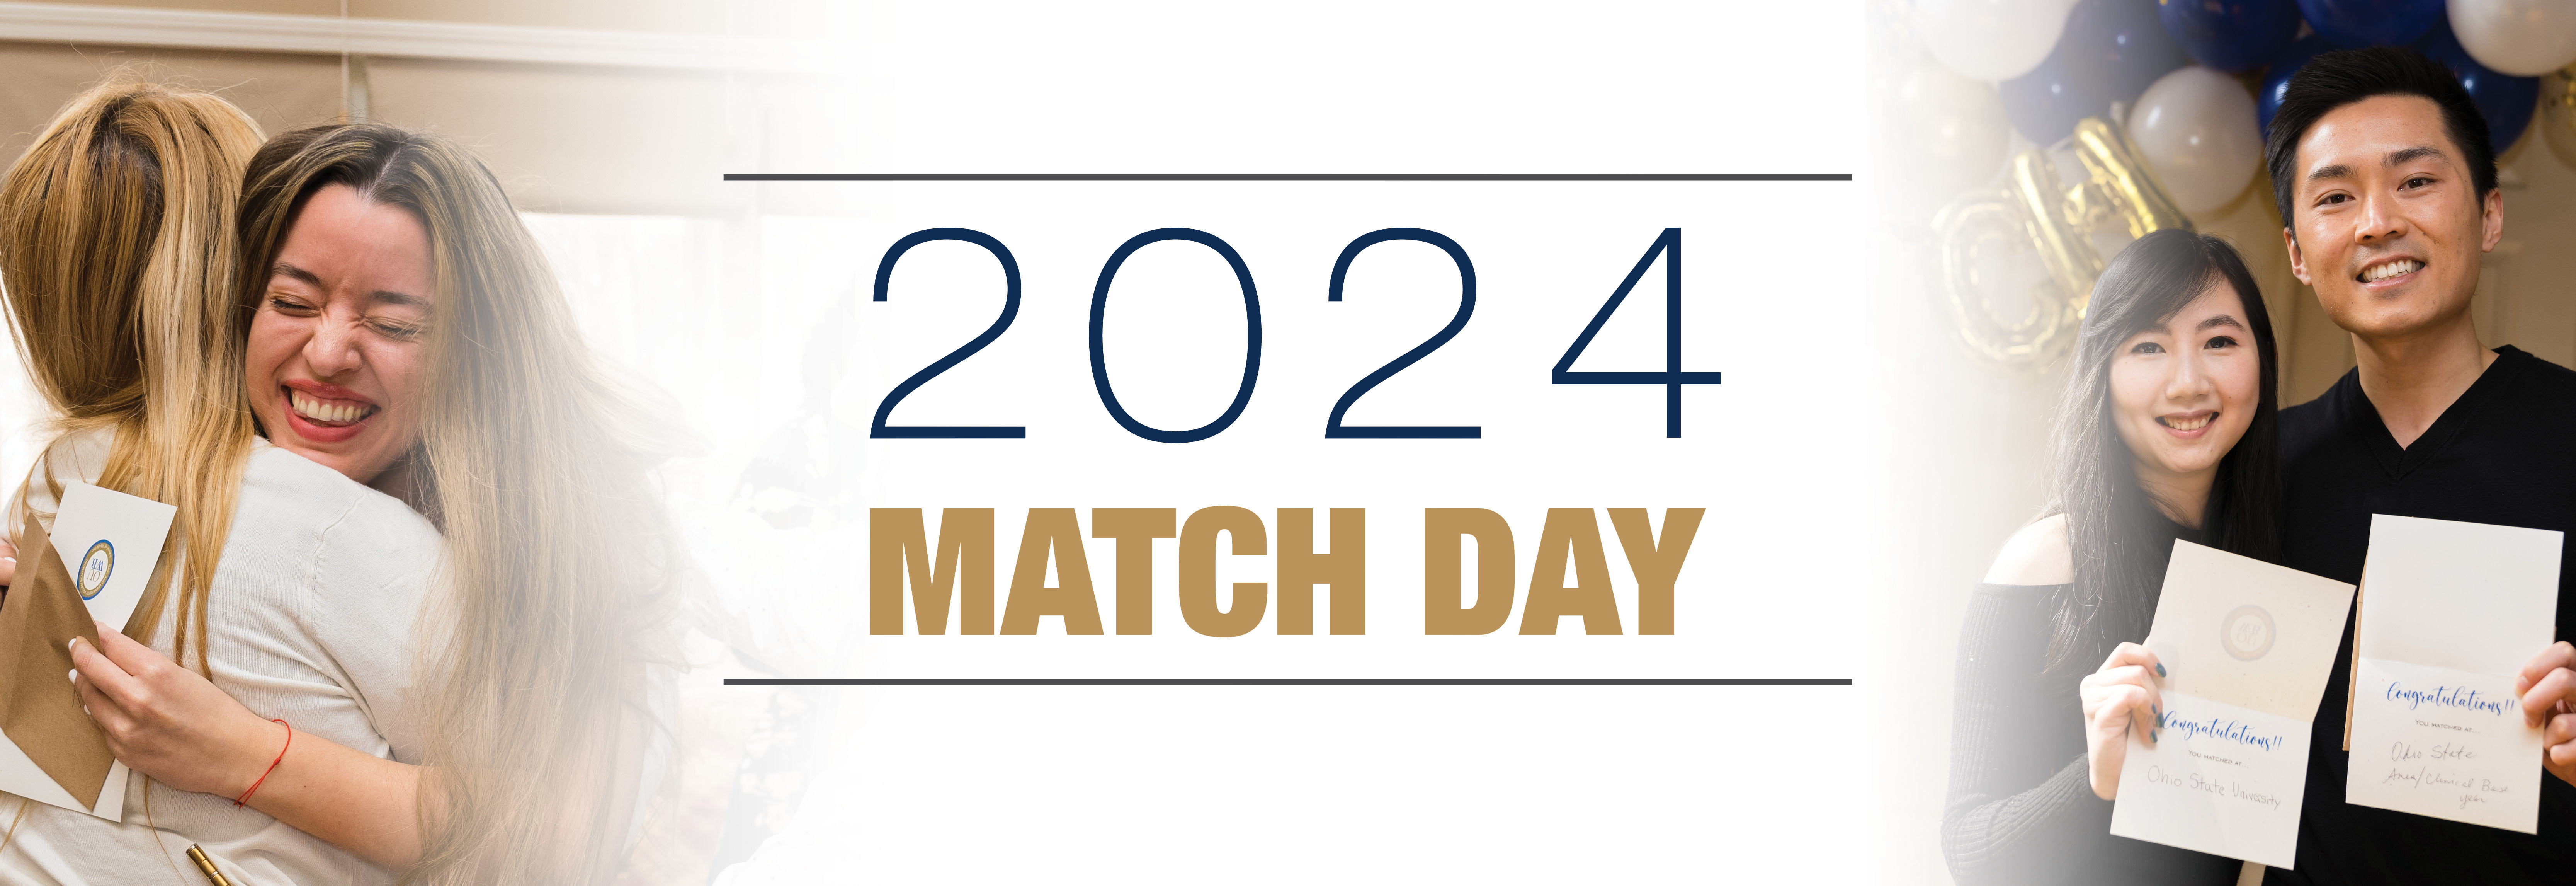 An image introducing the 2024 Match